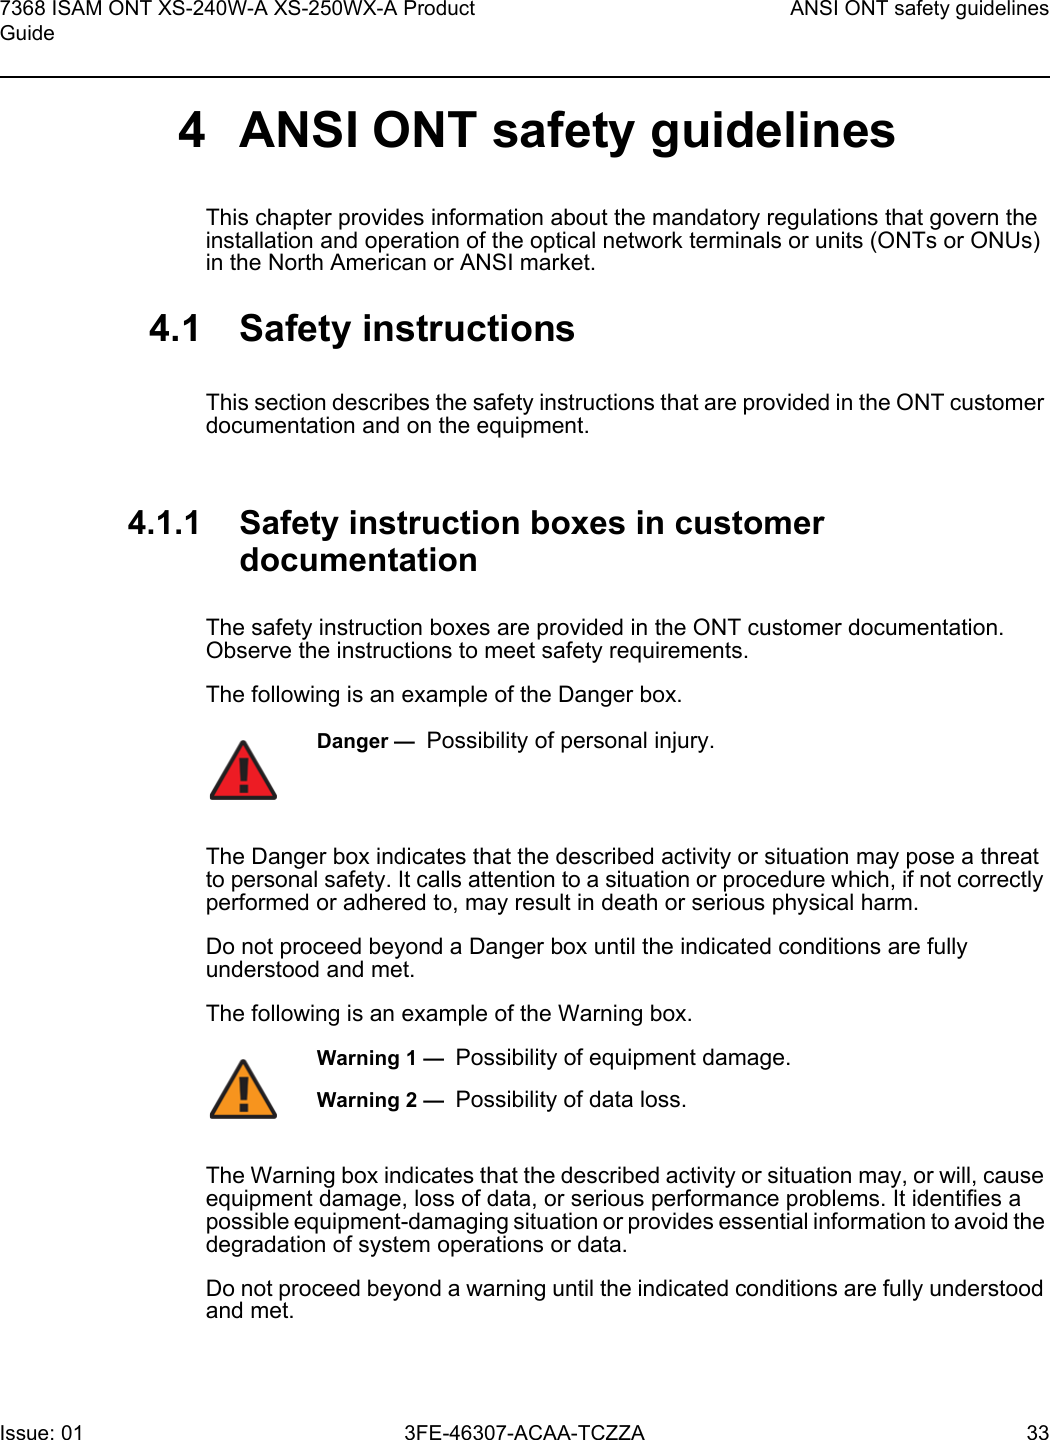 7368 ISAM ONT XS-240W-A XS-250WX-A Product GuideANSI ONT safety guidelinesIssue: 01 3FE-46307-ACAA-TCZZA 33 4 ANSI ONT safety guidelinesThis chapter provides information about the mandatory regulations that govern the installation and operation of the optical network terminals or units (ONTs or ONUs) in the North American or ANSI market.4.1 Safety instructionsThis section describes the safety instructions that are provided in the ONT customer documentation and on the equipment.4.1.1 Safety instruction boxes in customer documentationThe safety instruction boxes are provided in the ONT customer documentation. Observe the instructions to meet safety requirements.The following is an example of the Danger box.The Danger box indicates that the described activity or situation may pose a threat to personal safety. It calls attention to a situation or procedure which, if not correctly performed or adhered to, may result in death or serious physical harm. Do not proceed beyond a Danger box until the indicated conditions are fully understood and met.The following is an example of the Warning box.The Warning box indicates that the described activity or situation may, or will, cause equipment damage, loss of data, or serious performance problems. It identifies a possible equipment-damaging situation or provides essential information to avoid the degradation of system operations or data.Do not proceed beyond a warning until the indicated conditions are fully understood and met.Danger —  Possibility of personal injury. Warning 1 —  Possibility of equipment damage.Warning 2 —  Possibility of data loss.